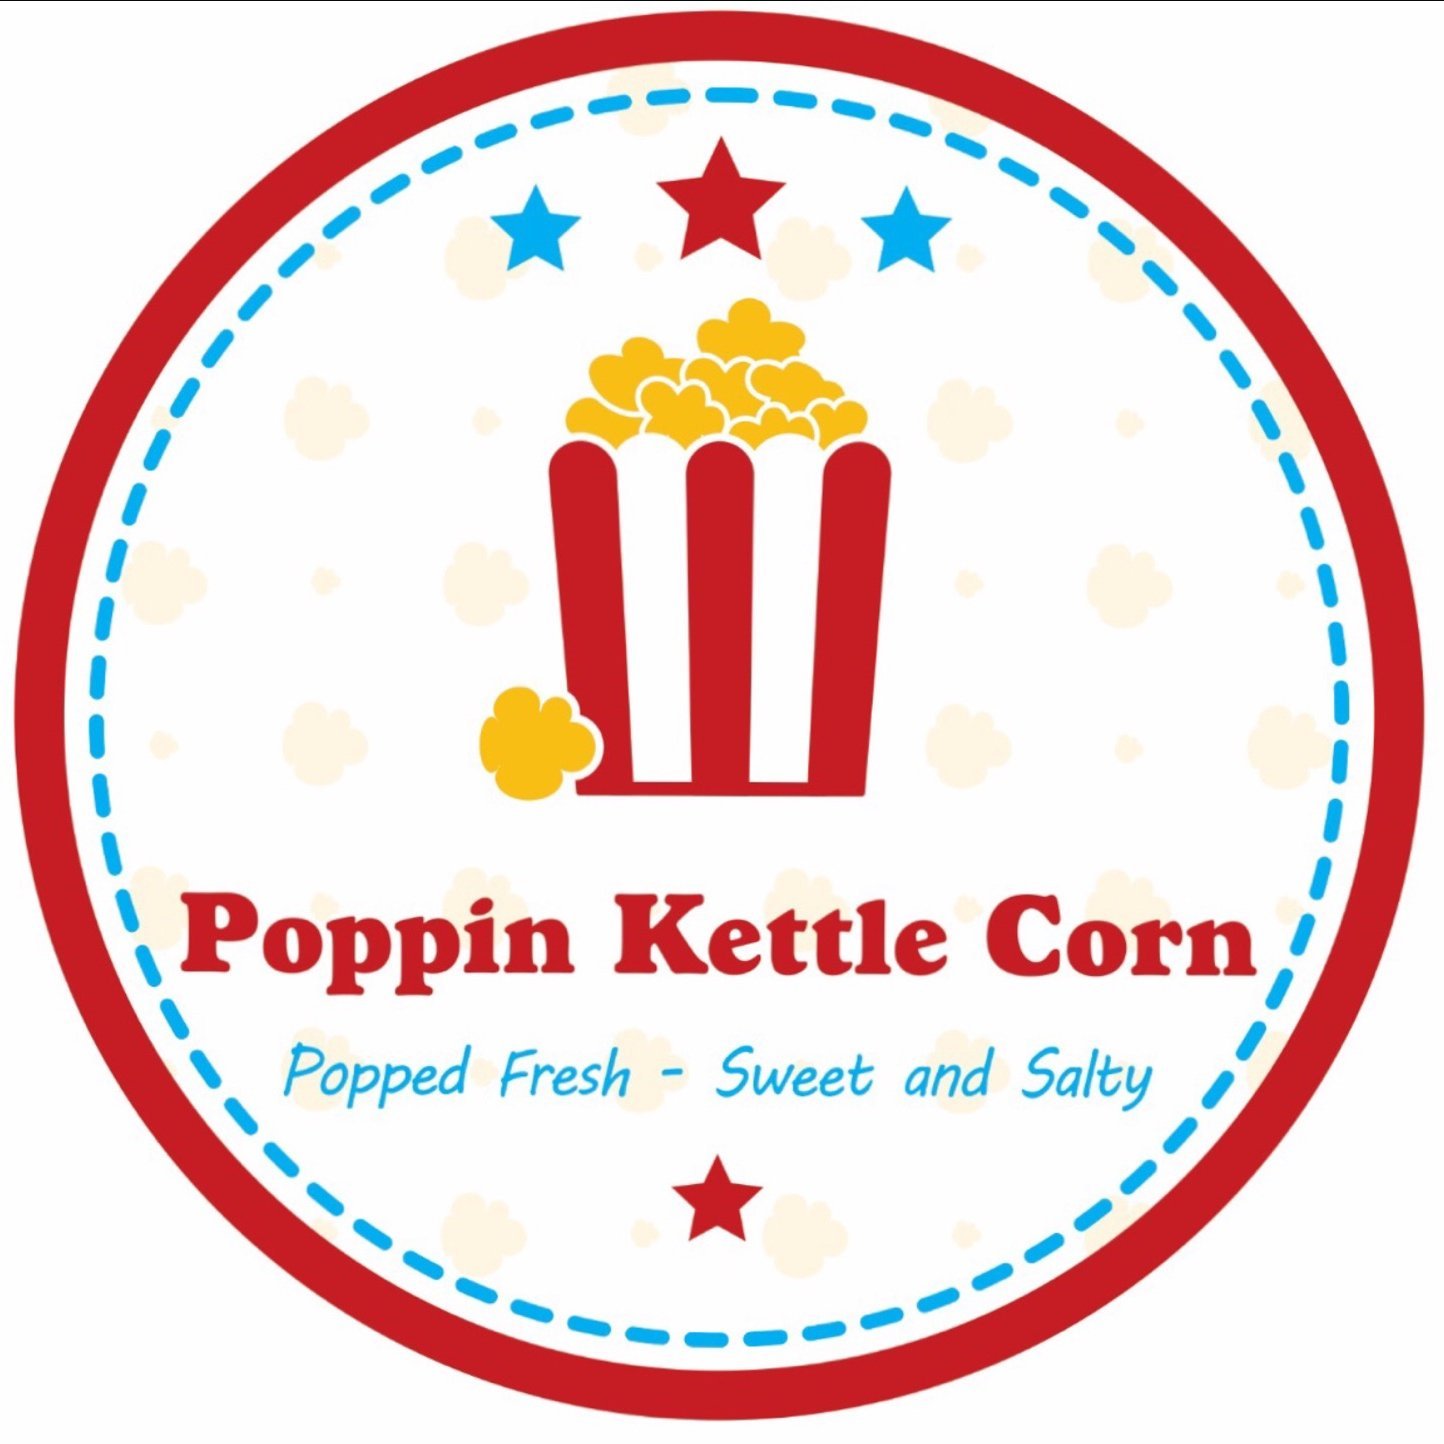 Supplying the most desired and sought after kettle corn on the planet. 😍😍😍🍿🍿🍿